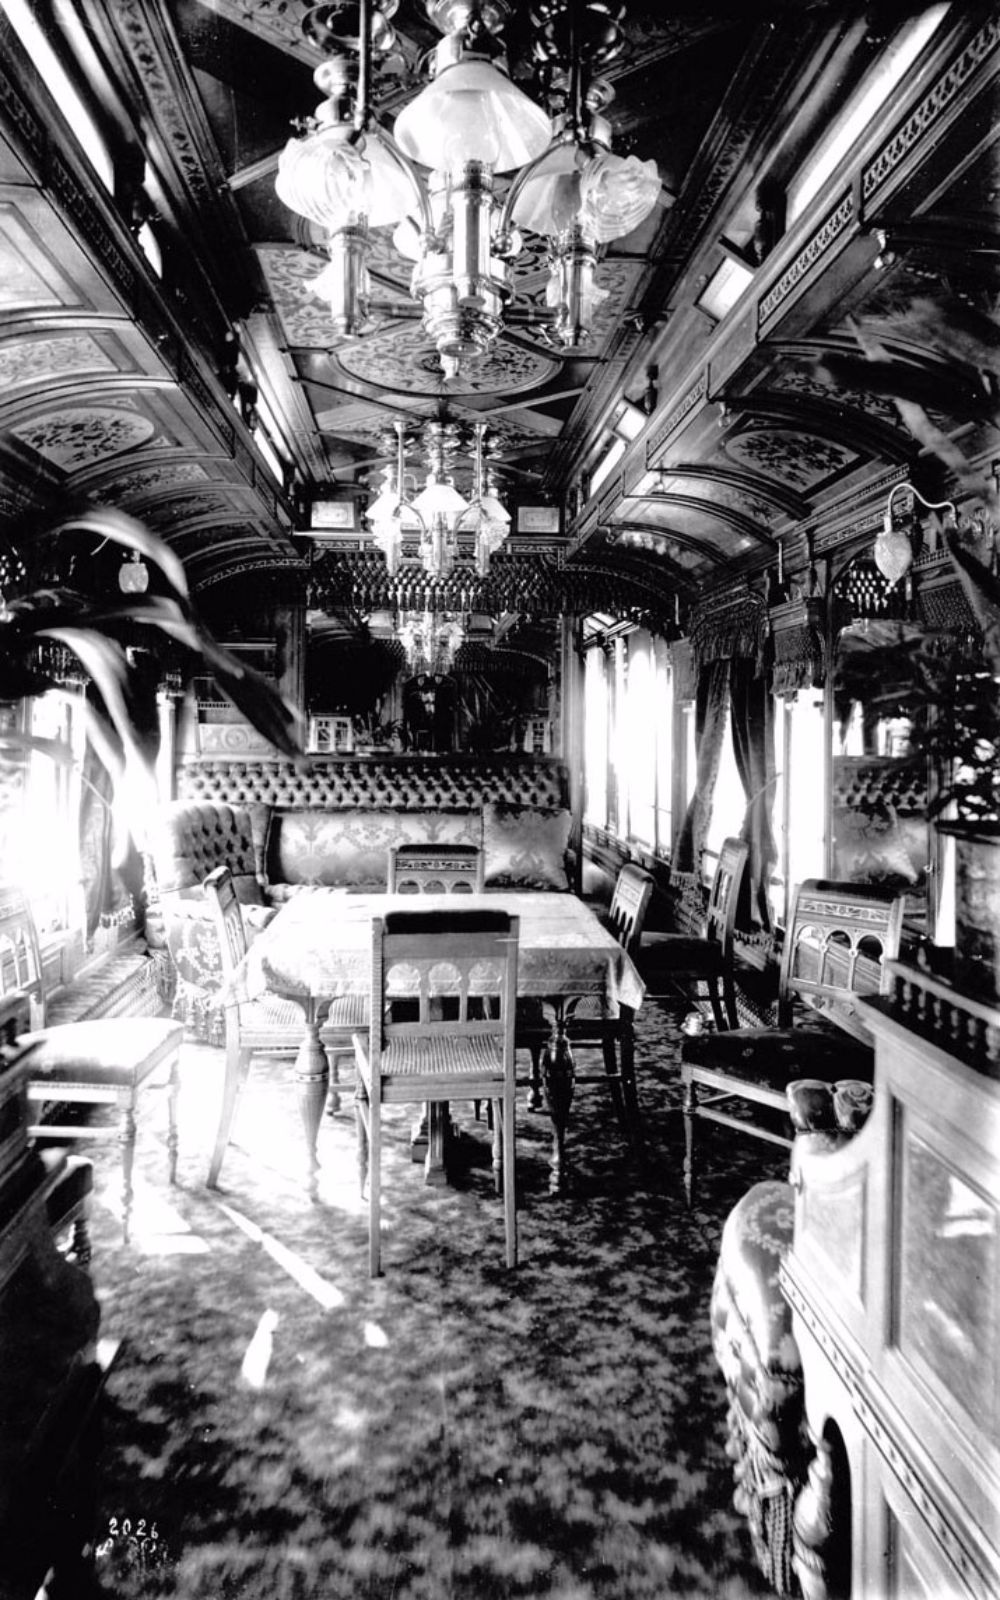 The Glory Days Of Train Travel Inside The Pullman Train